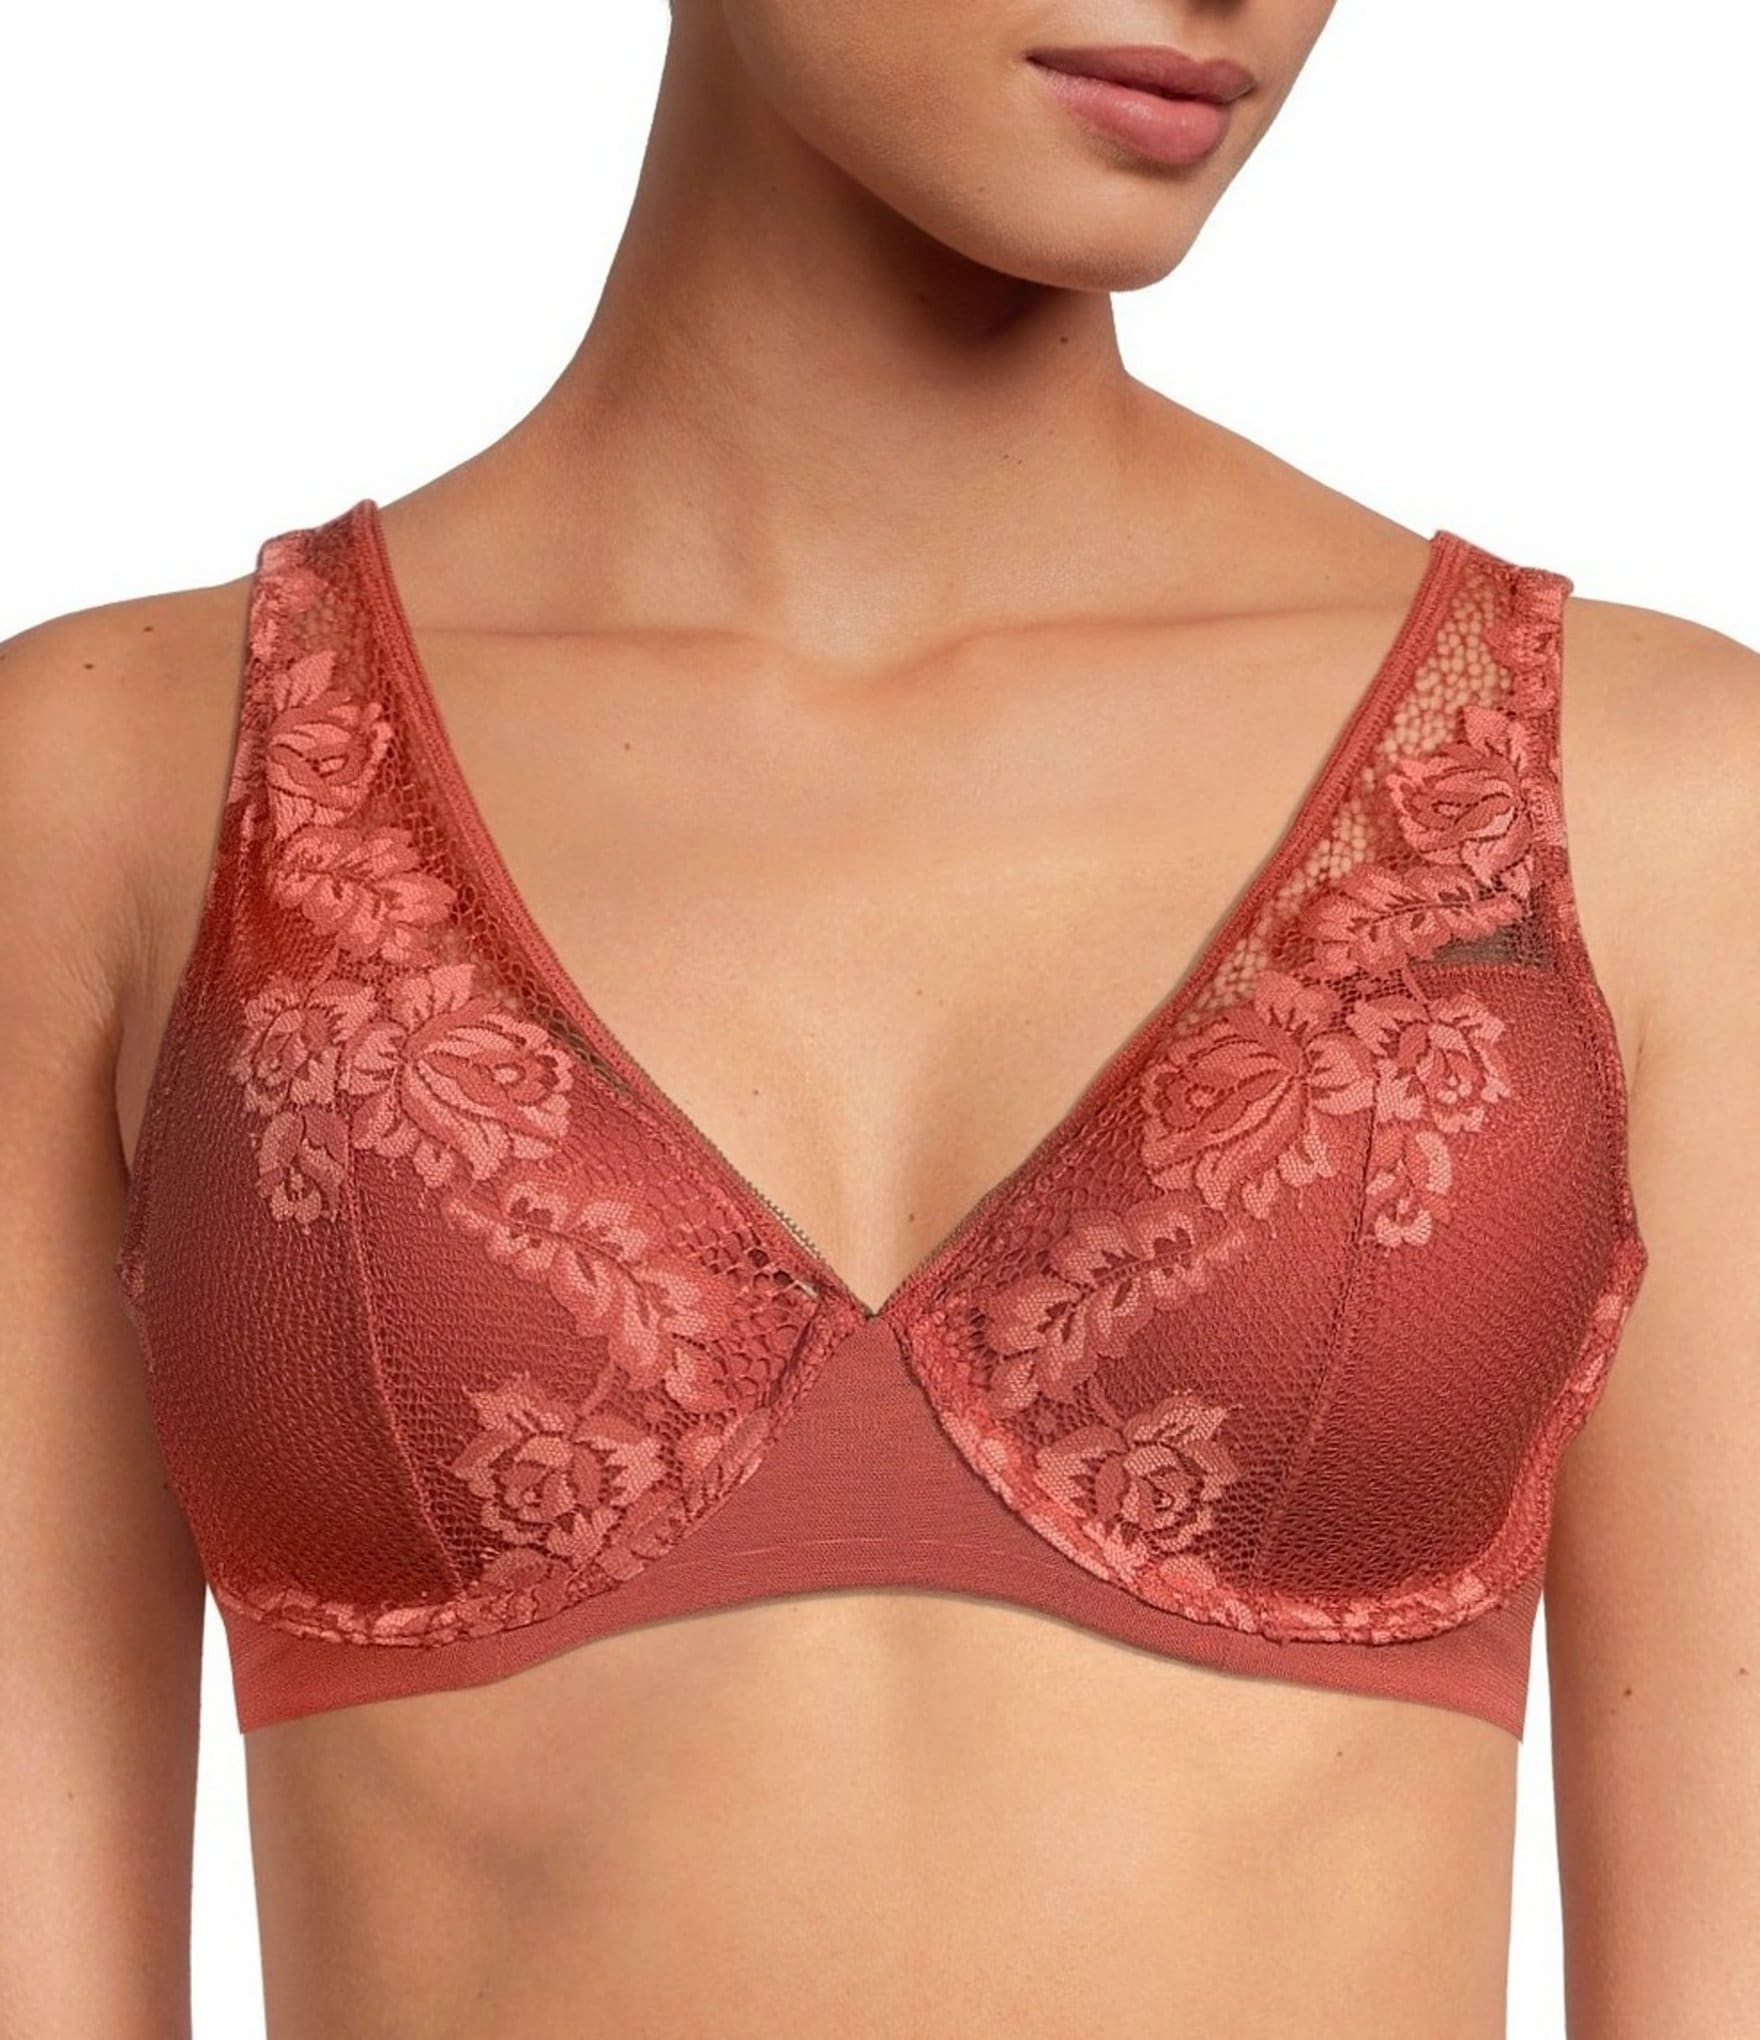 Lace n Lingerie Magazine - SIDE SPILLAGE…how to overcome? Most of us are  concerned by the cup size and strap position in a bra. However, there's  more to a perfect bra. From